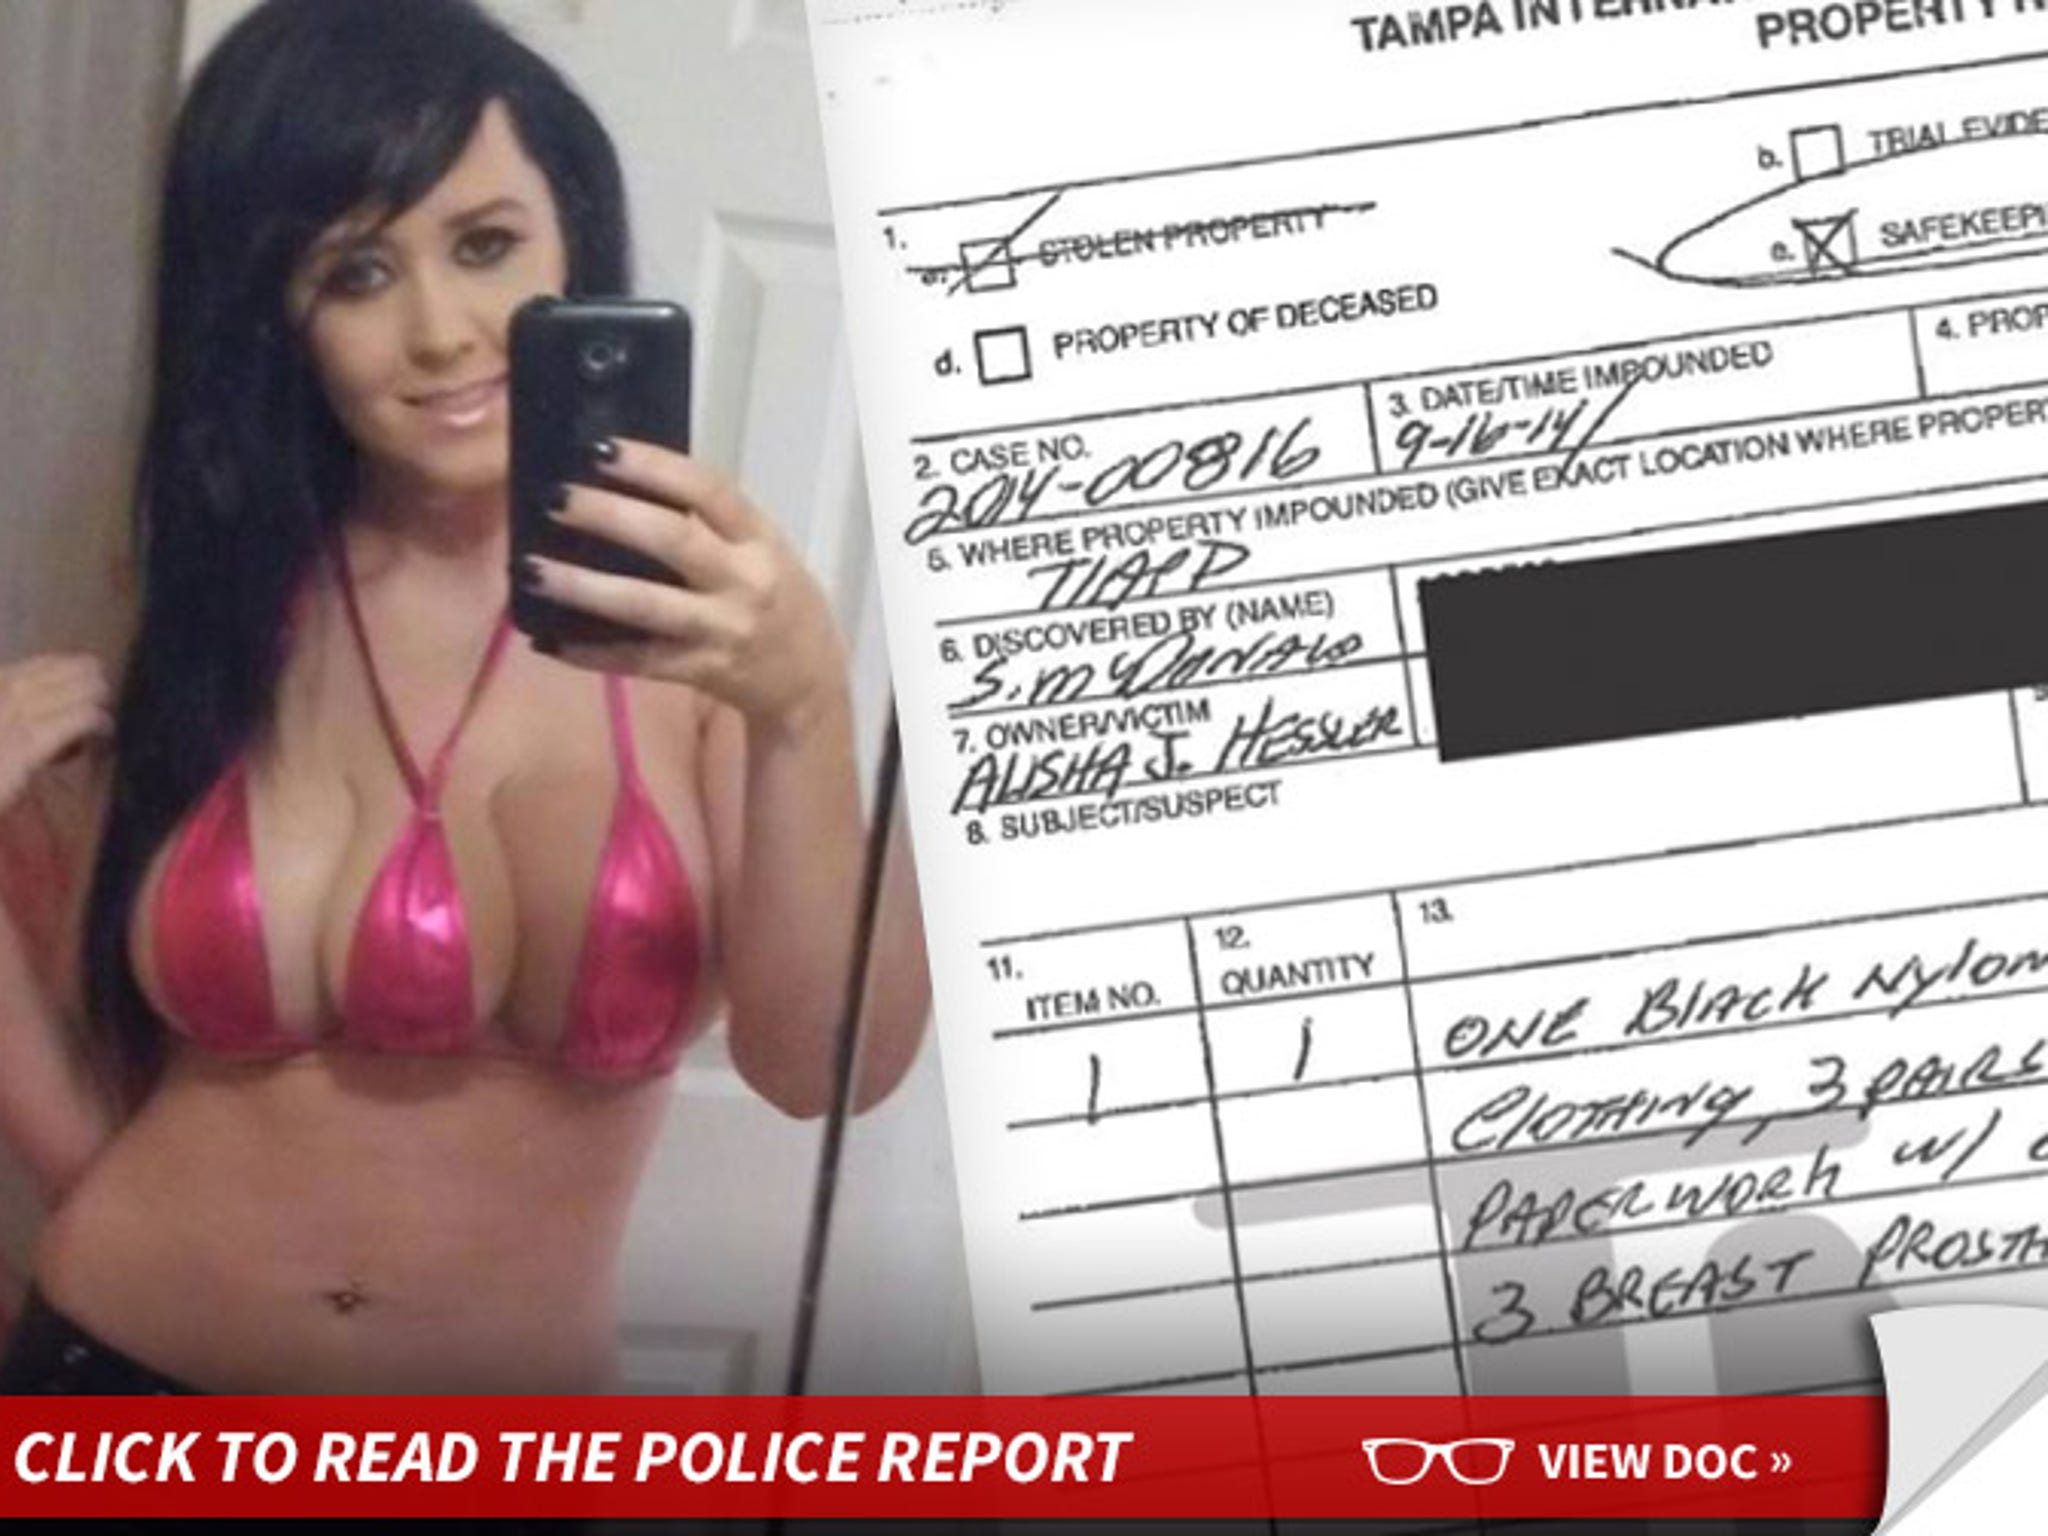 Is the woman with 3 breasts Jasmine Tridevil real or a hoax?